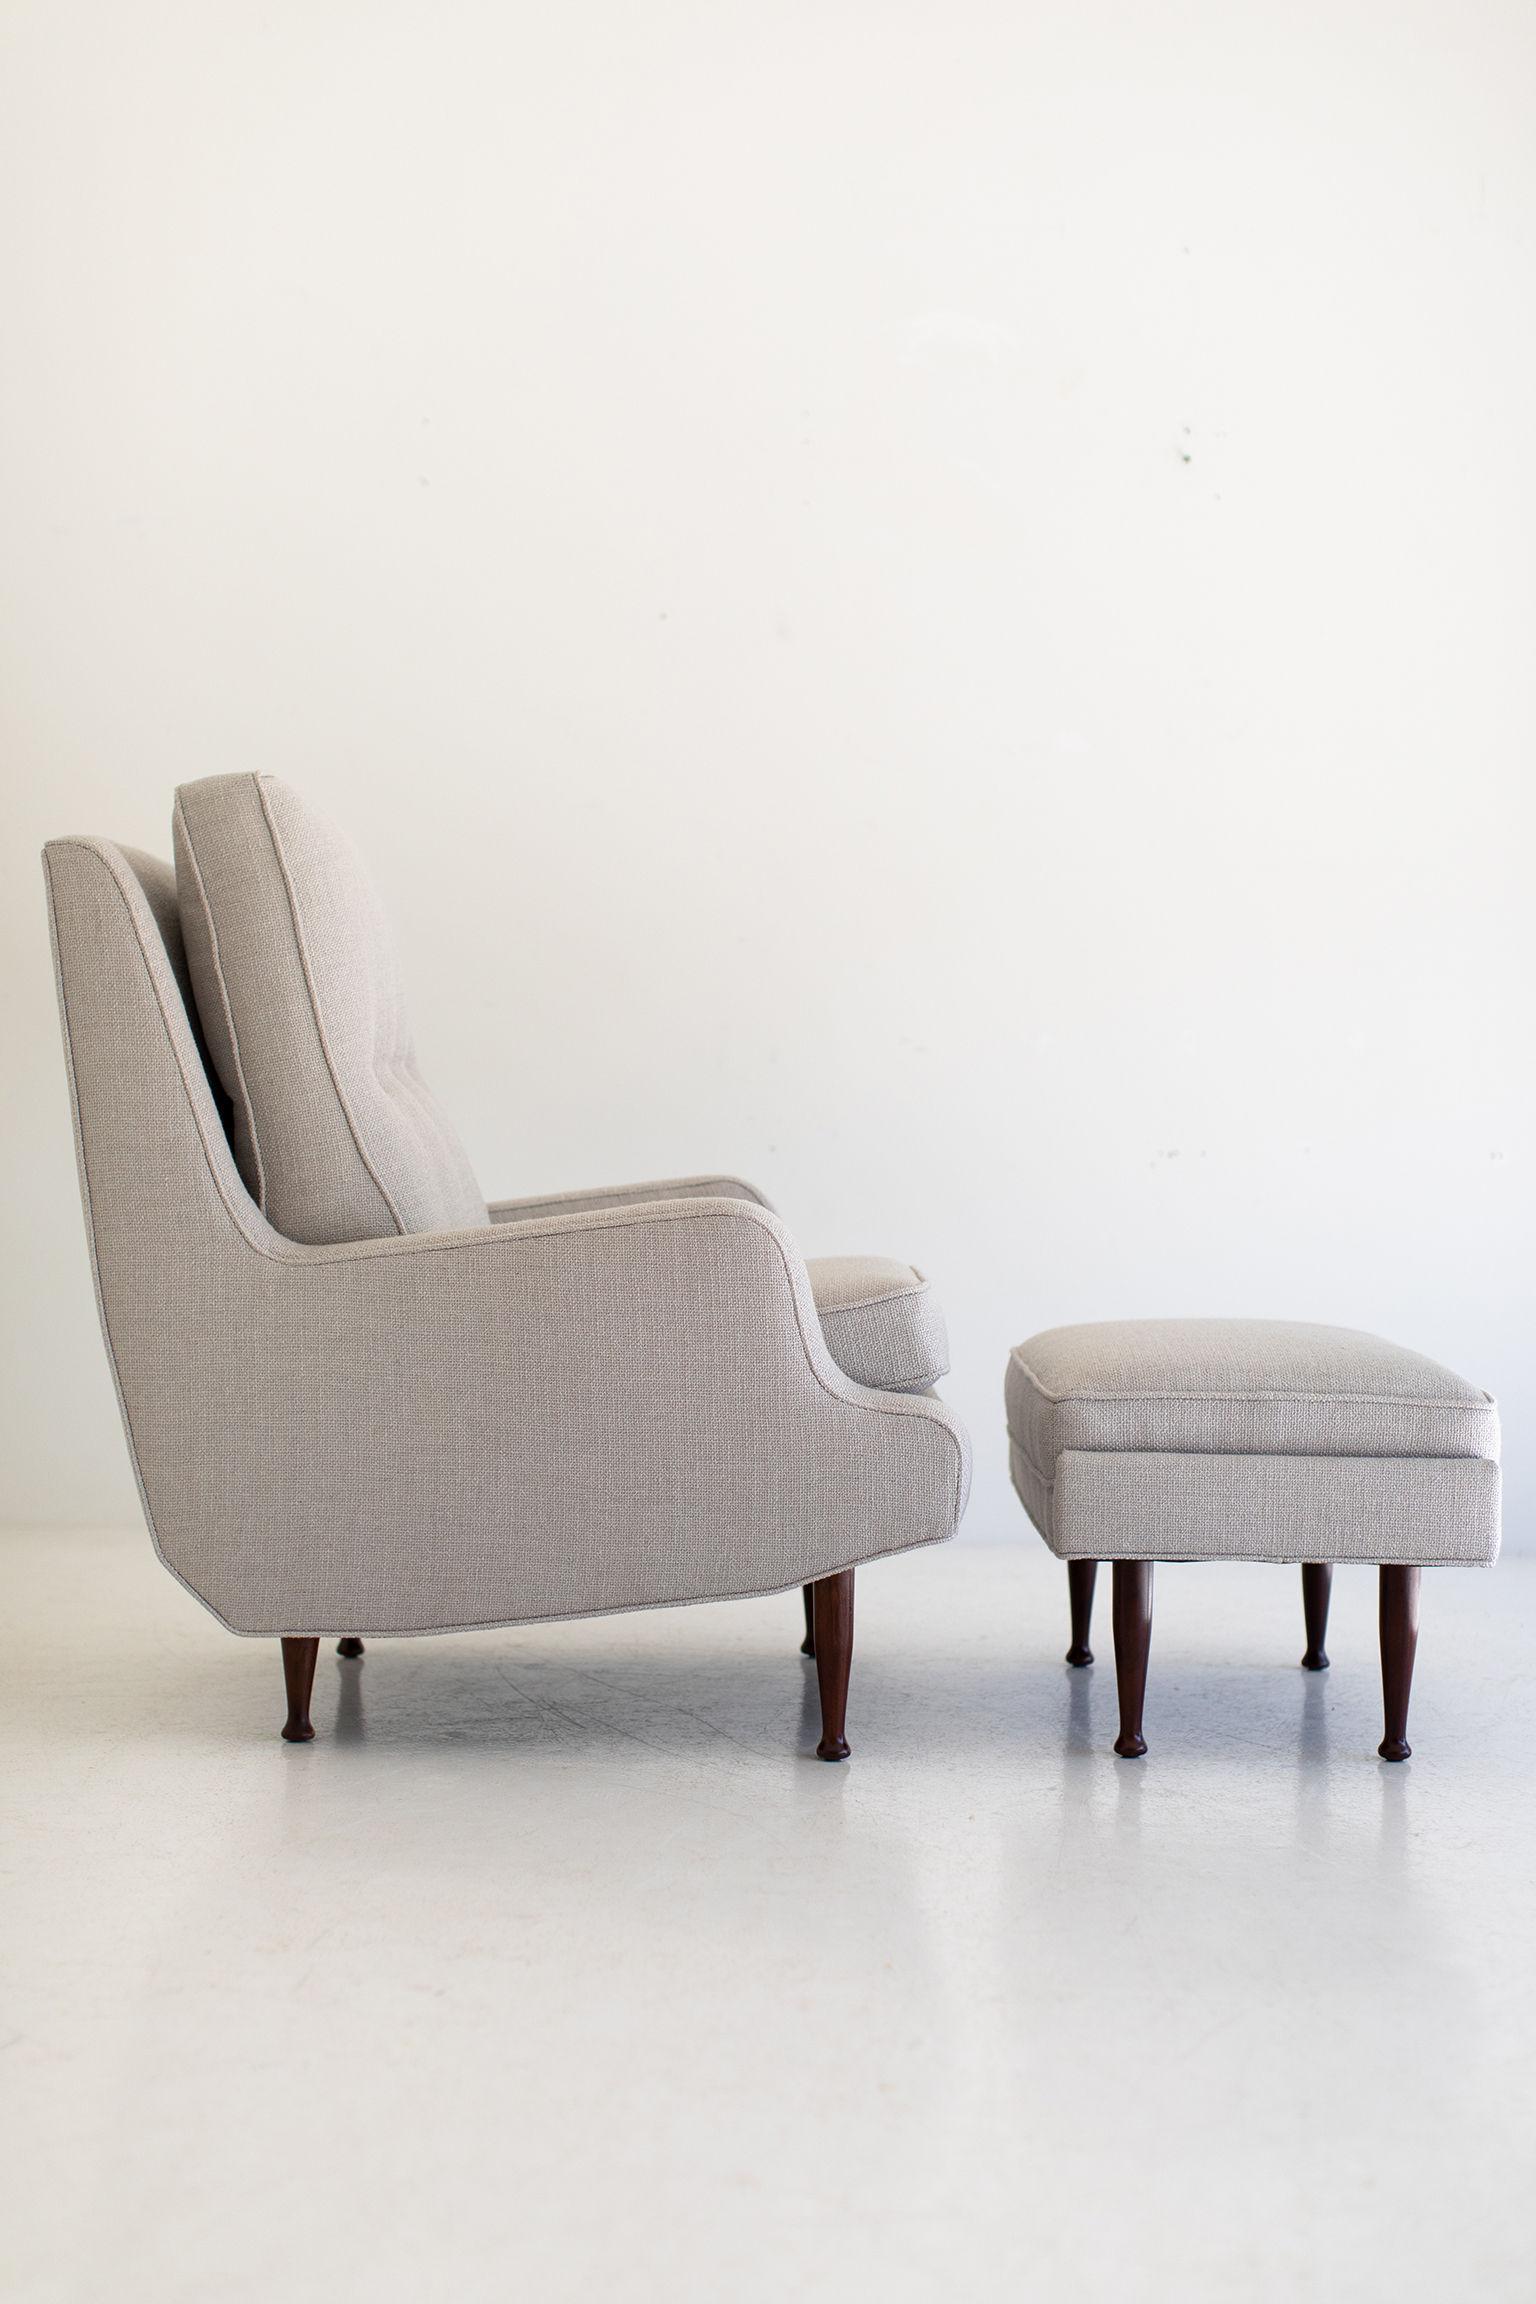 Designer: Erno Fabry attributed

Manufacturer: Fabry Associates Inc.
Period or model: Mid-Century Modern.
Specs: Wood, Fabric

Condition:

This Erno Fabry attributed lounge chair and ottoman are in excellent restored condition. The chair and